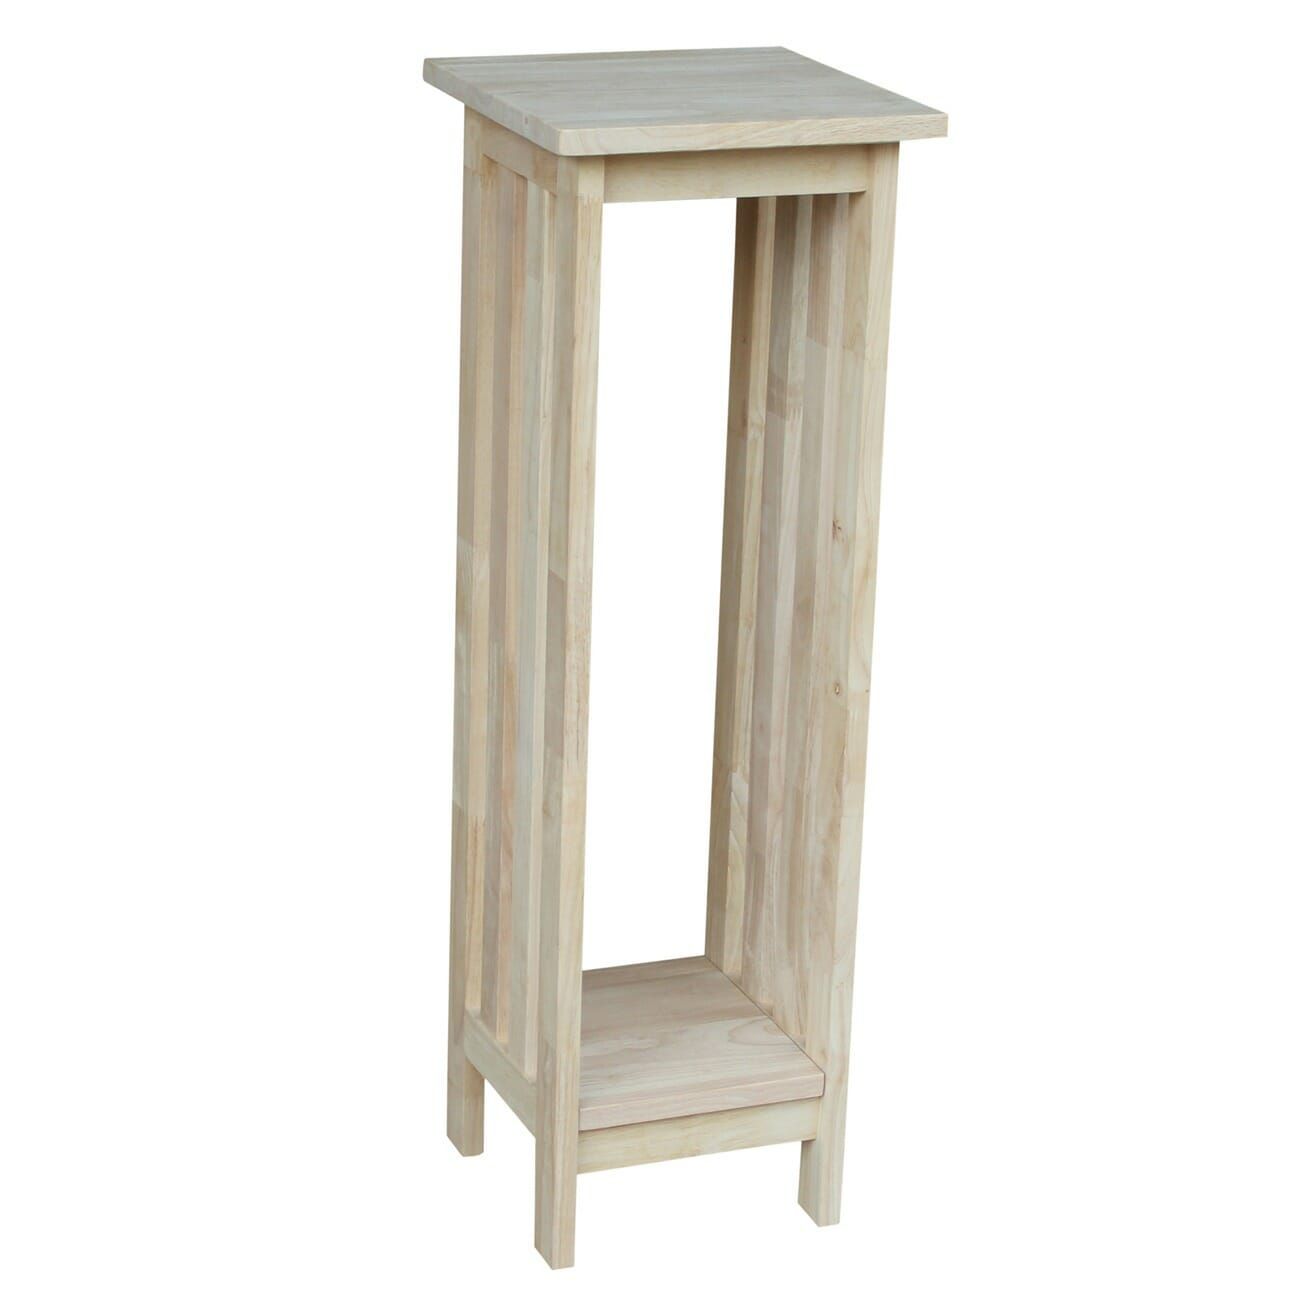 3069 36 Inch Tall Mission Plant Stand | Unfinished Furniture Of Wilmington With 36 Inch Plant Stands (View 3 of 15)